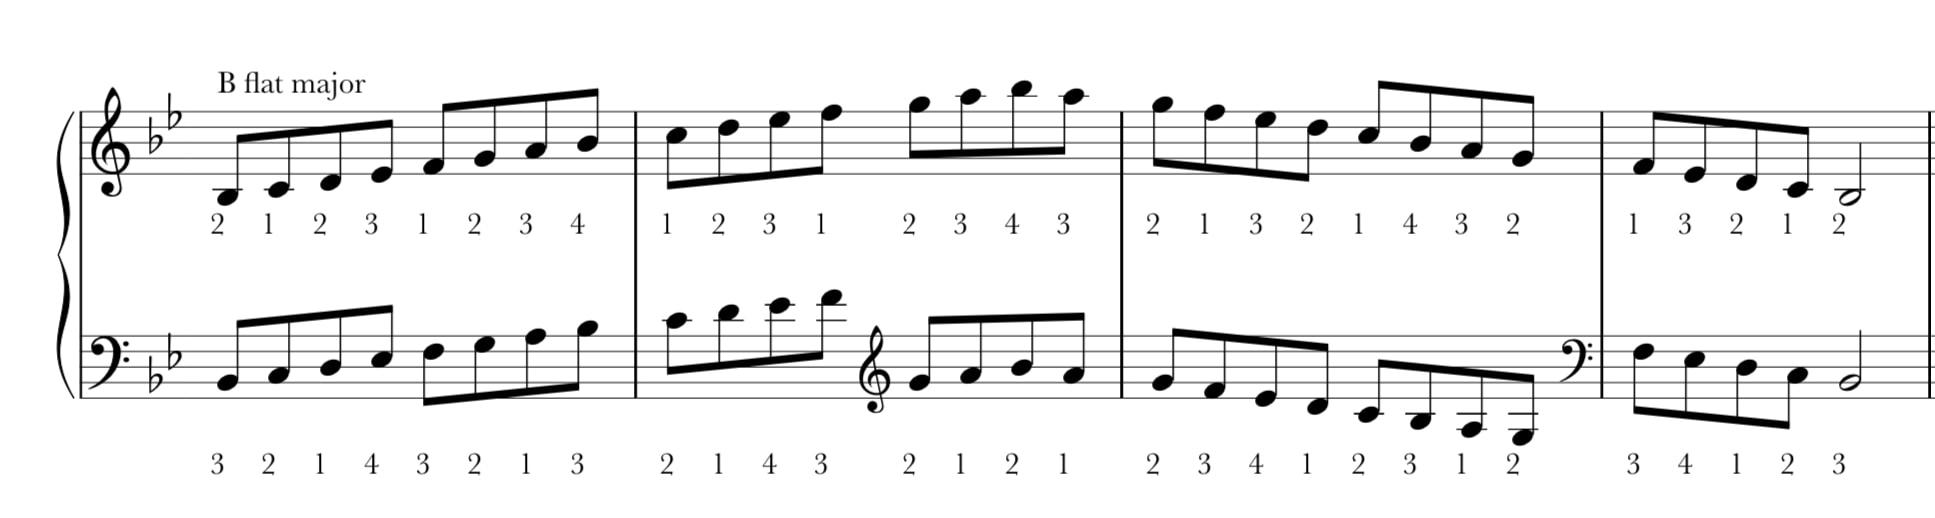 B flat major scale notation for piano